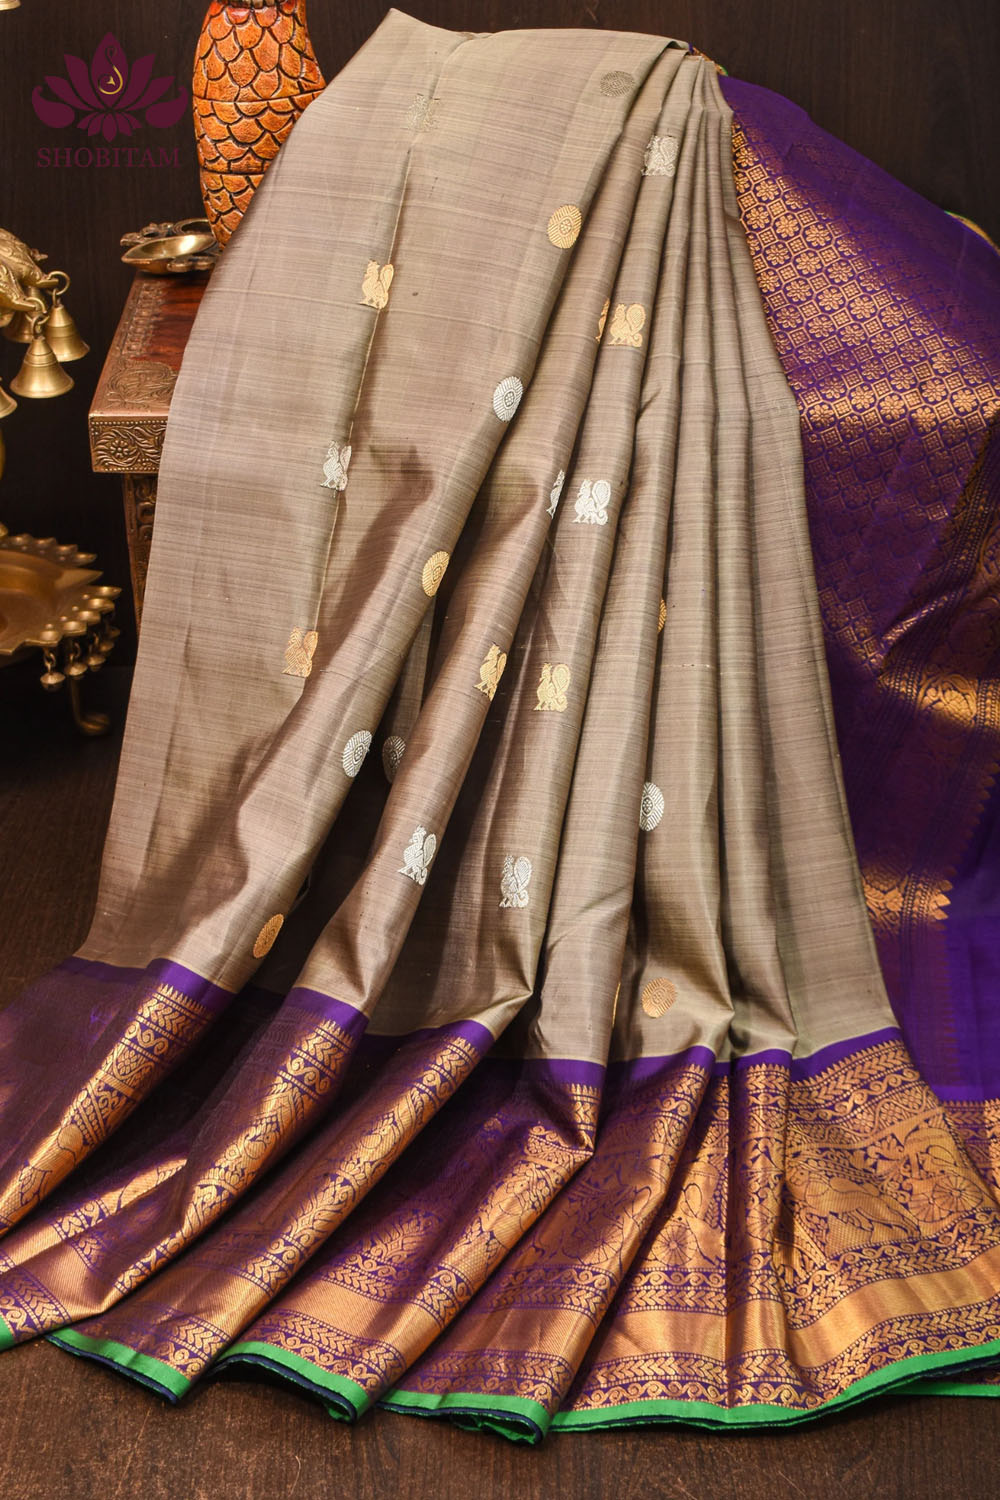 Preorder: Exquisite Handwoven Gadwal Pure Silk Saree in Gray and Purple with 11" wide zari Border | SILK MARK CERTIFIED